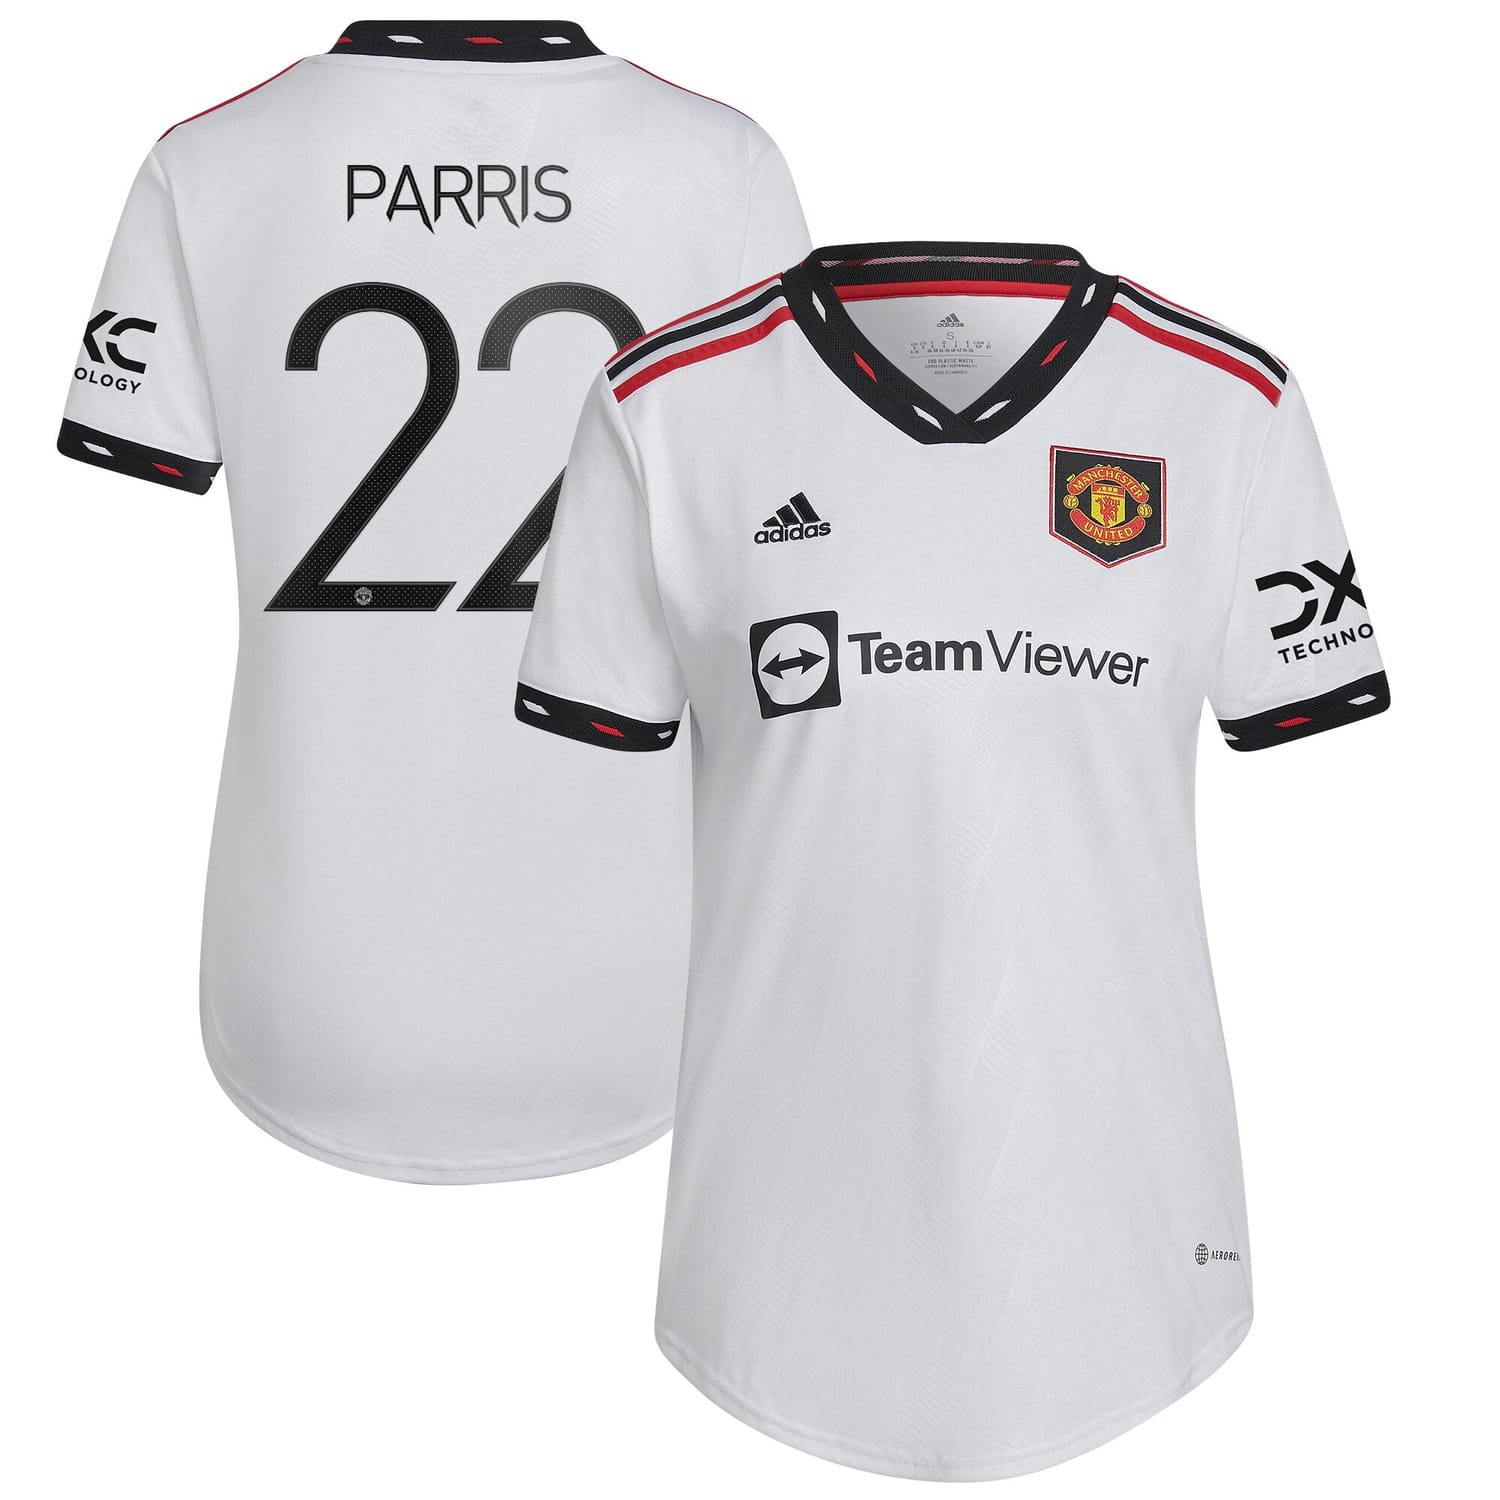 Premier League Manchester United Away Cup Jersey Shirt 2022-23 player Nikita Parris 22 printing for Women